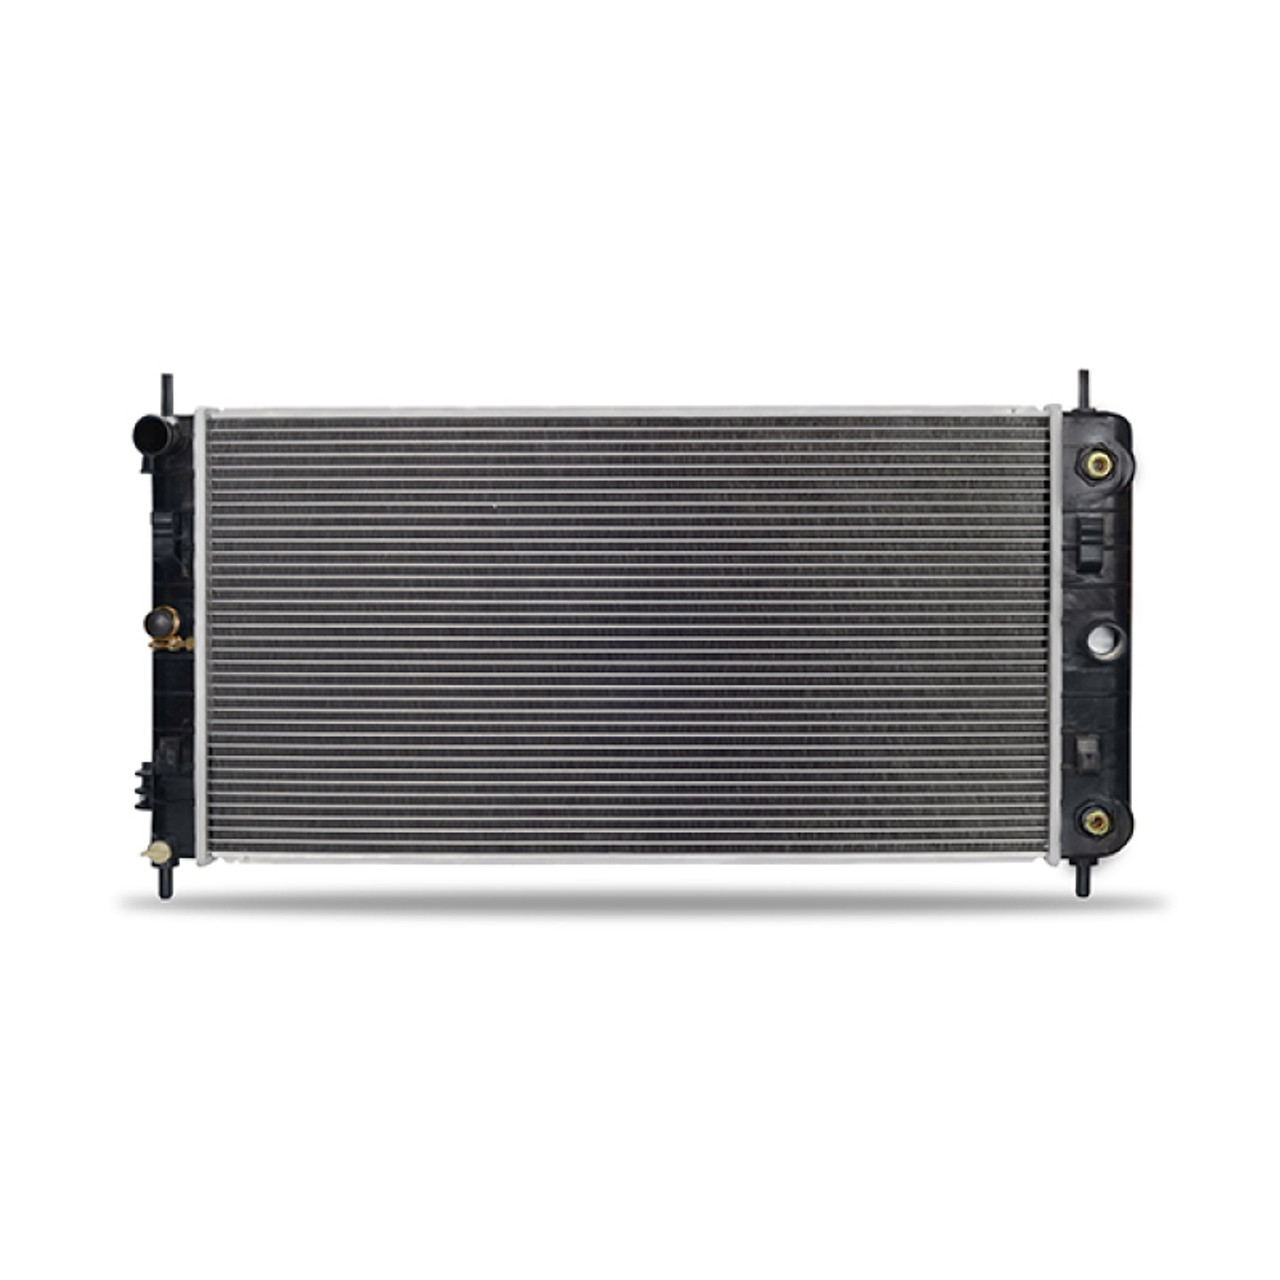 Mishimoto Chevrolet Malibu Replacement Radiator 2004-2006 - R2727-AT Photo - out of package